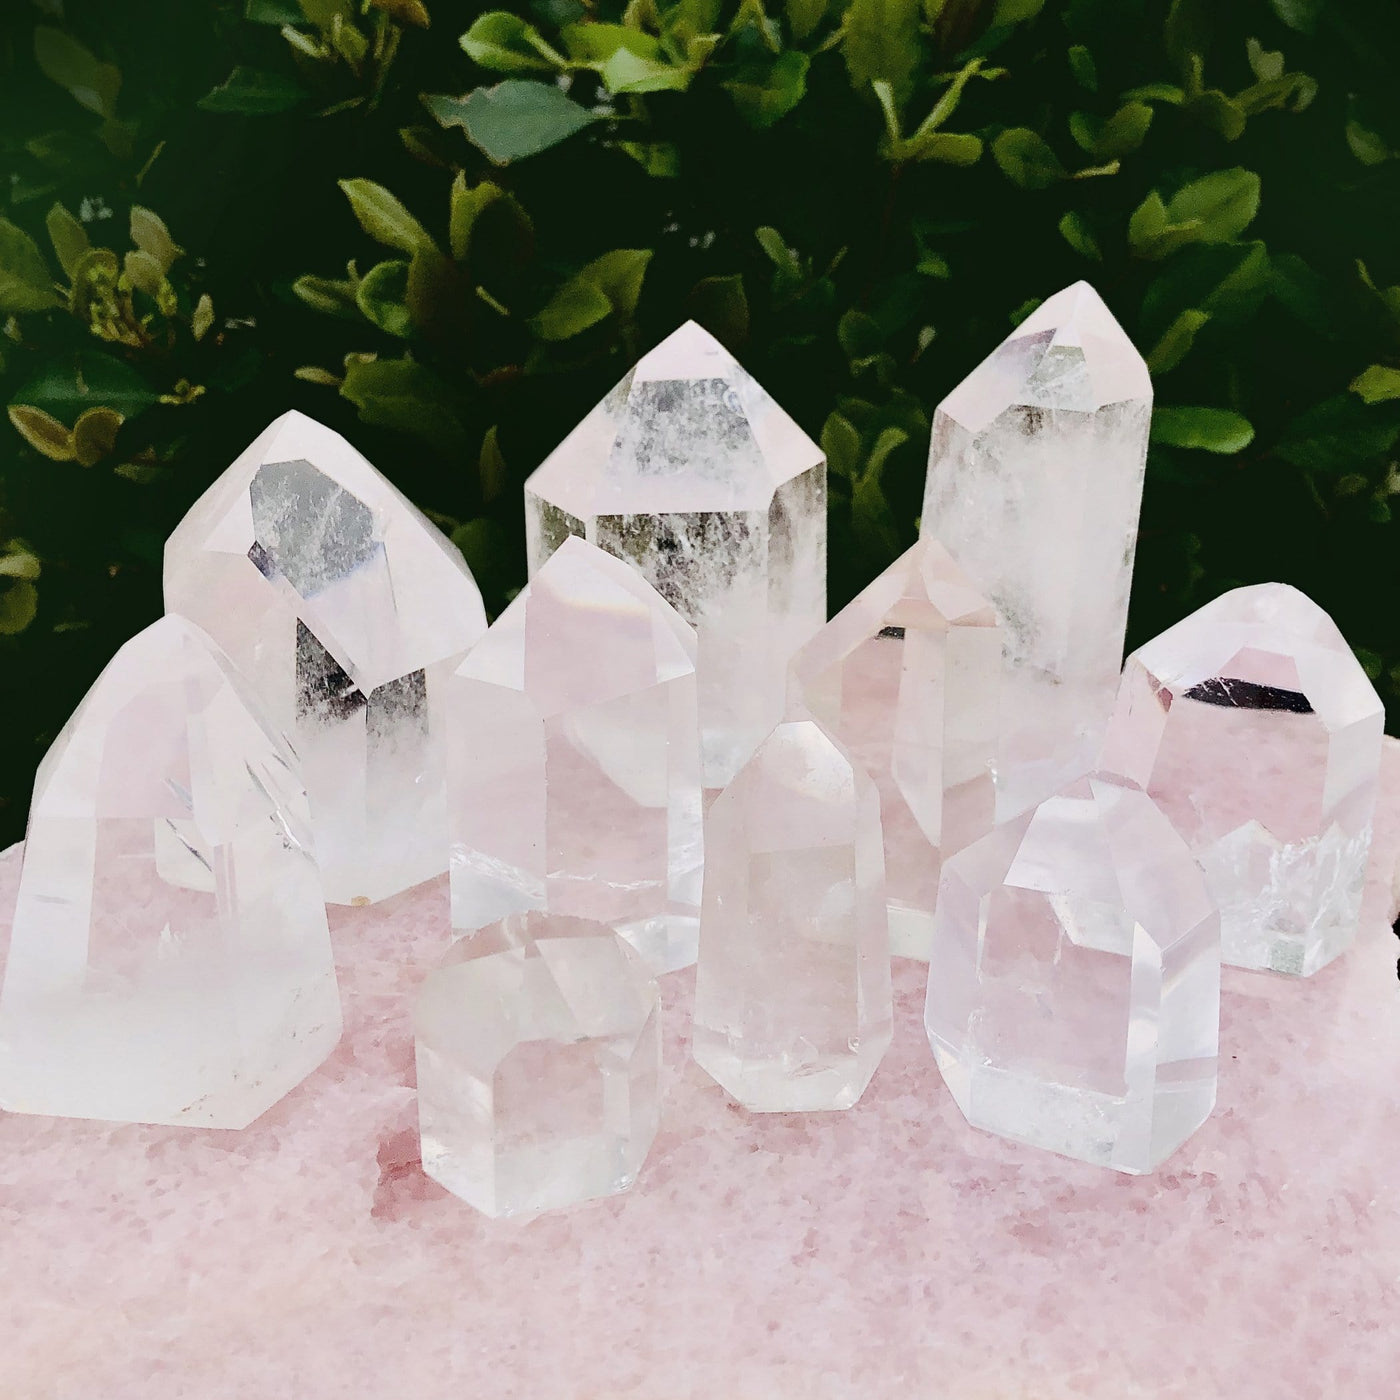 Crystal Quartz Polished Cut Base Points of varying sizes to show stock available